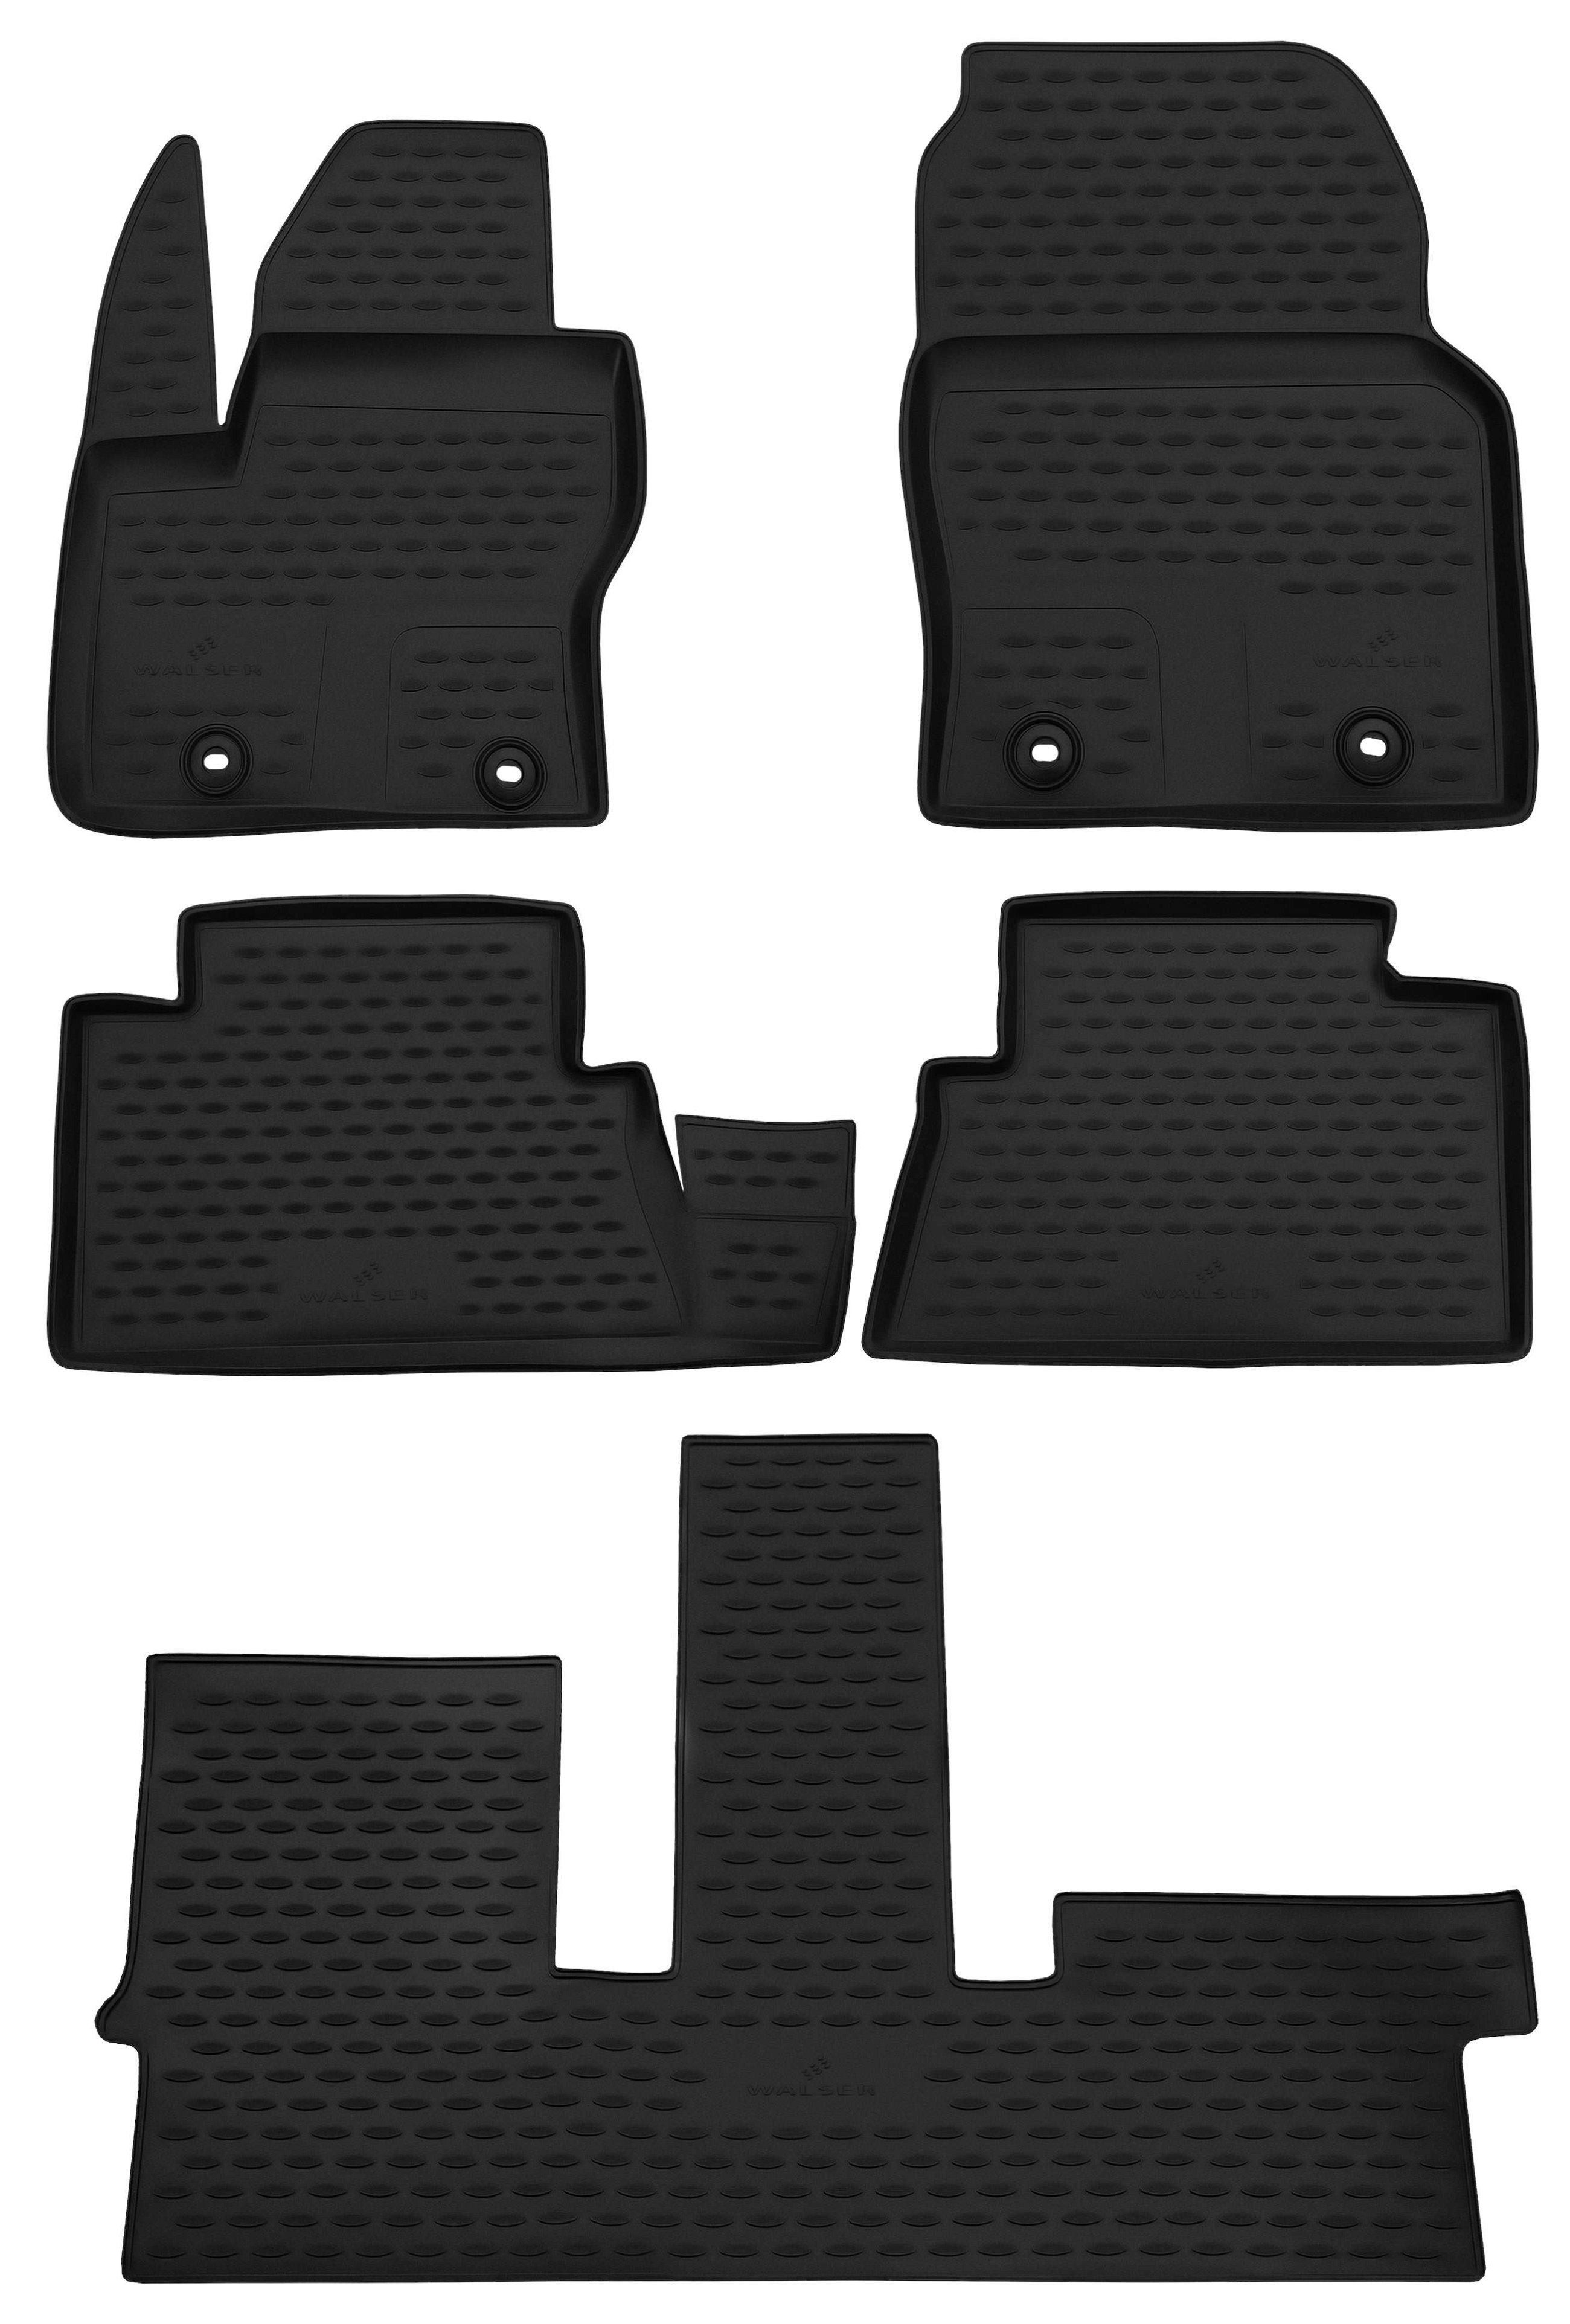 XTR Rubber Mats for Ford Grand C-Max, 7-seater 12/2010-2019